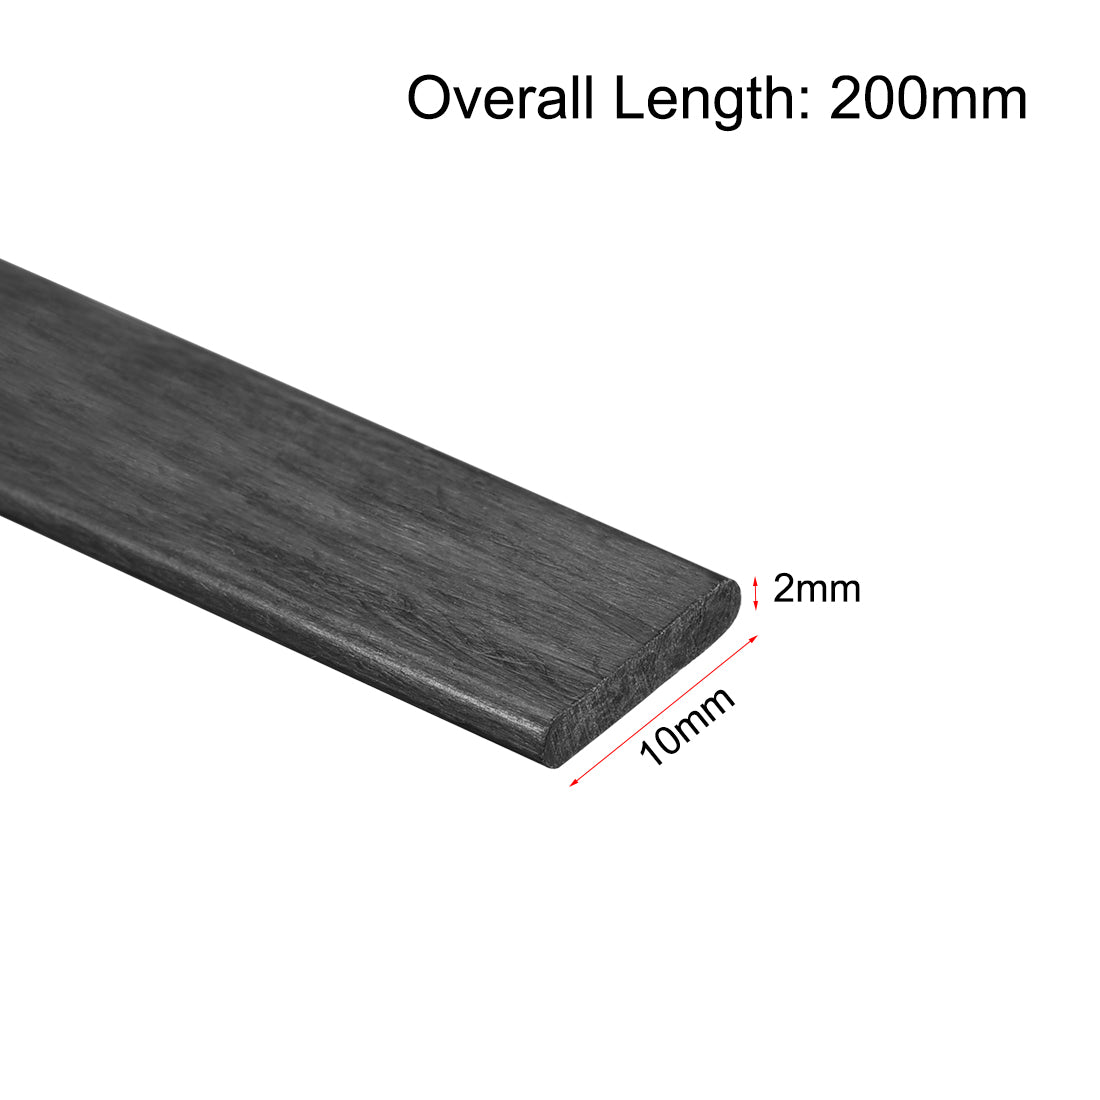 uxcell Uxcell Carbon Fiber Strip Bars 2x10mm 200mm Length Pultruded Carbon Fiber Strips for Kites, RC Airplane 1 Pcs